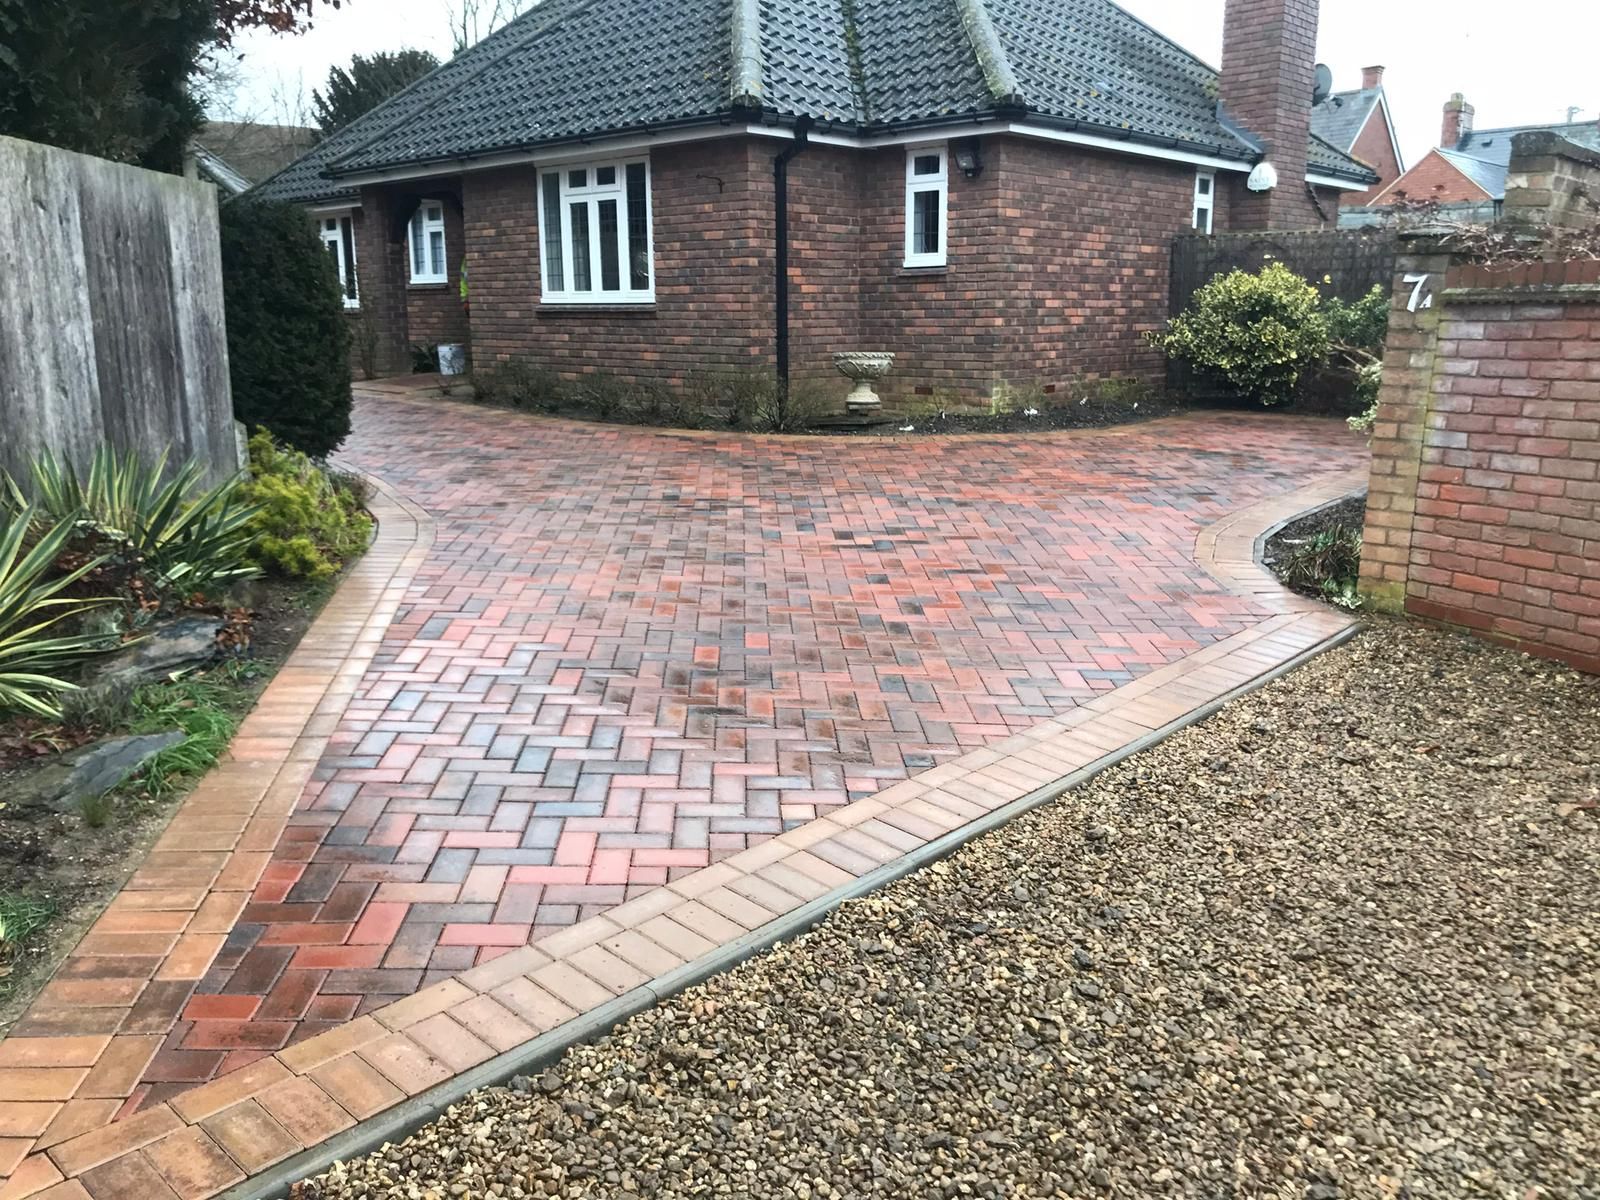 Bedford block paving driveway specialists Quality Paving install quality driveways and patios in Bedford and surrounding areas